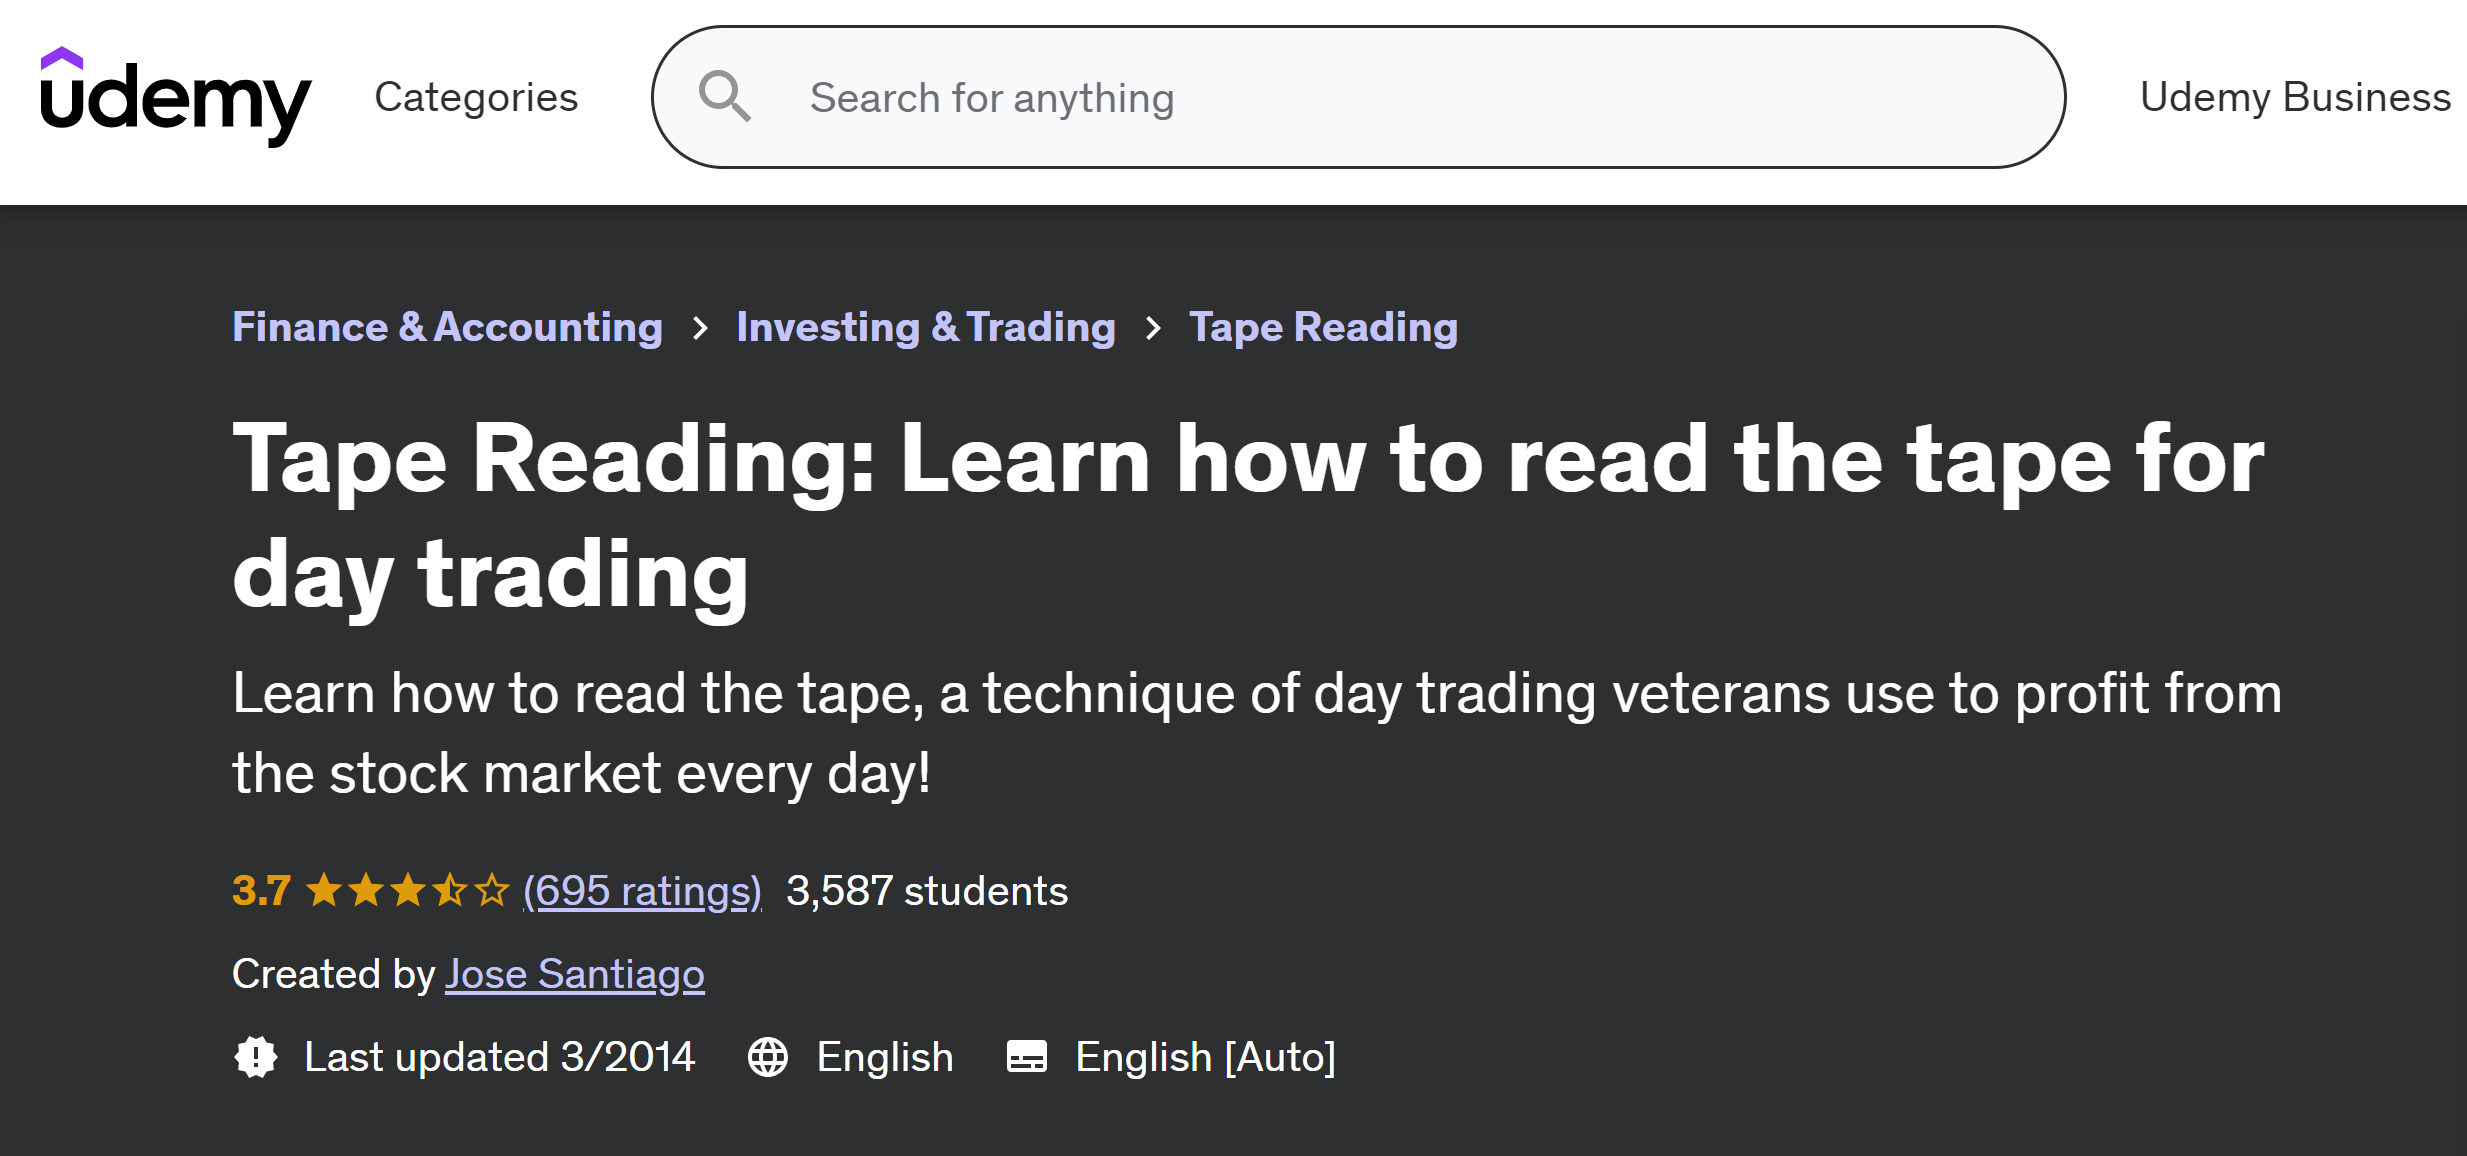 Tape Reading For Day Trading By Jose Santiago